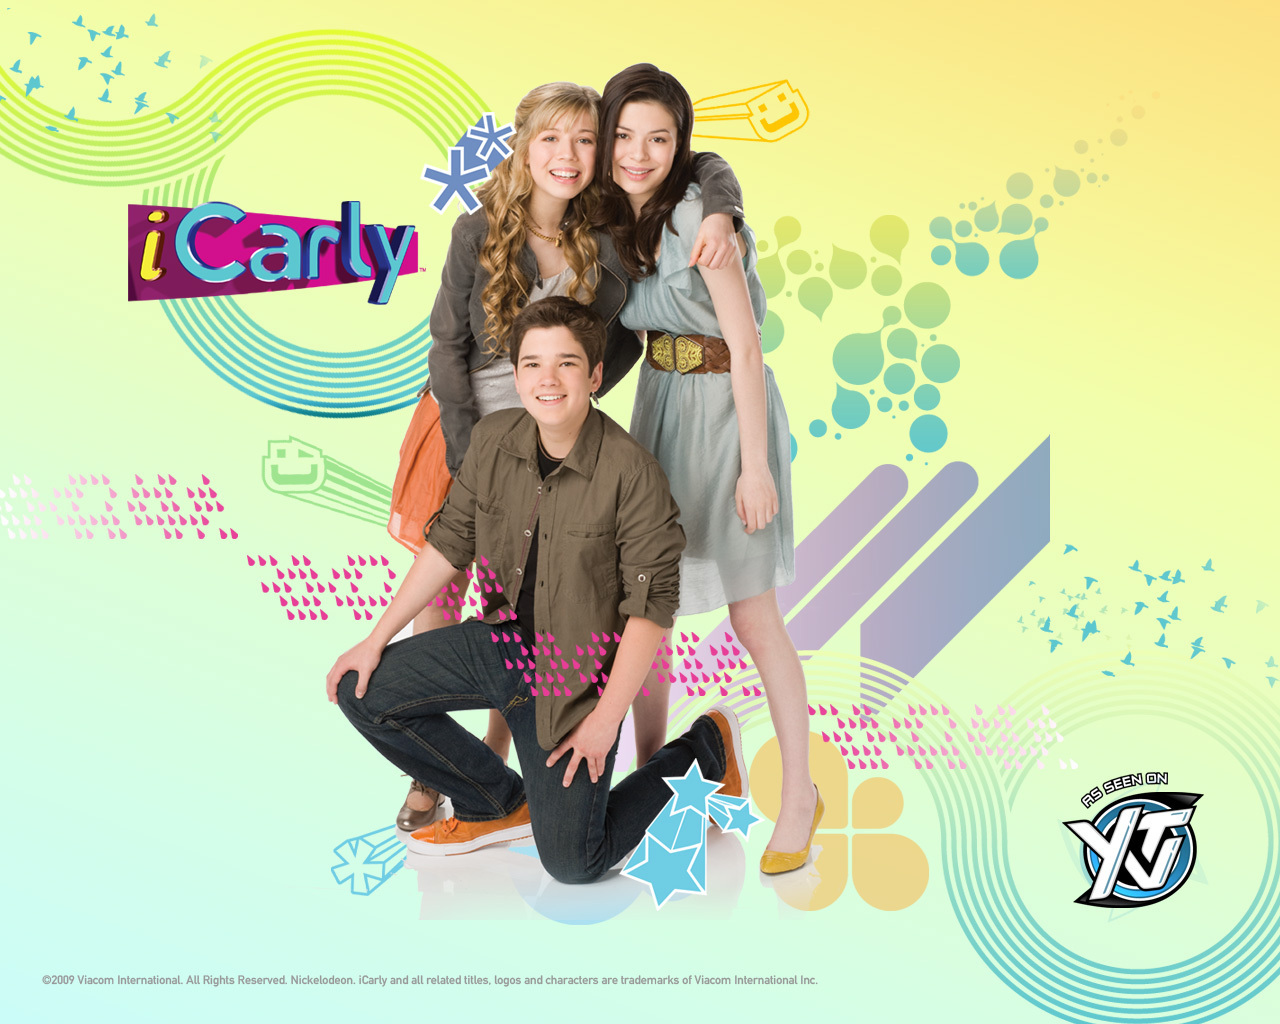 http://images2.fanpop.com/images/photos/5300000/wallpaper-10-icarly-5380078-1280-1024.jpg